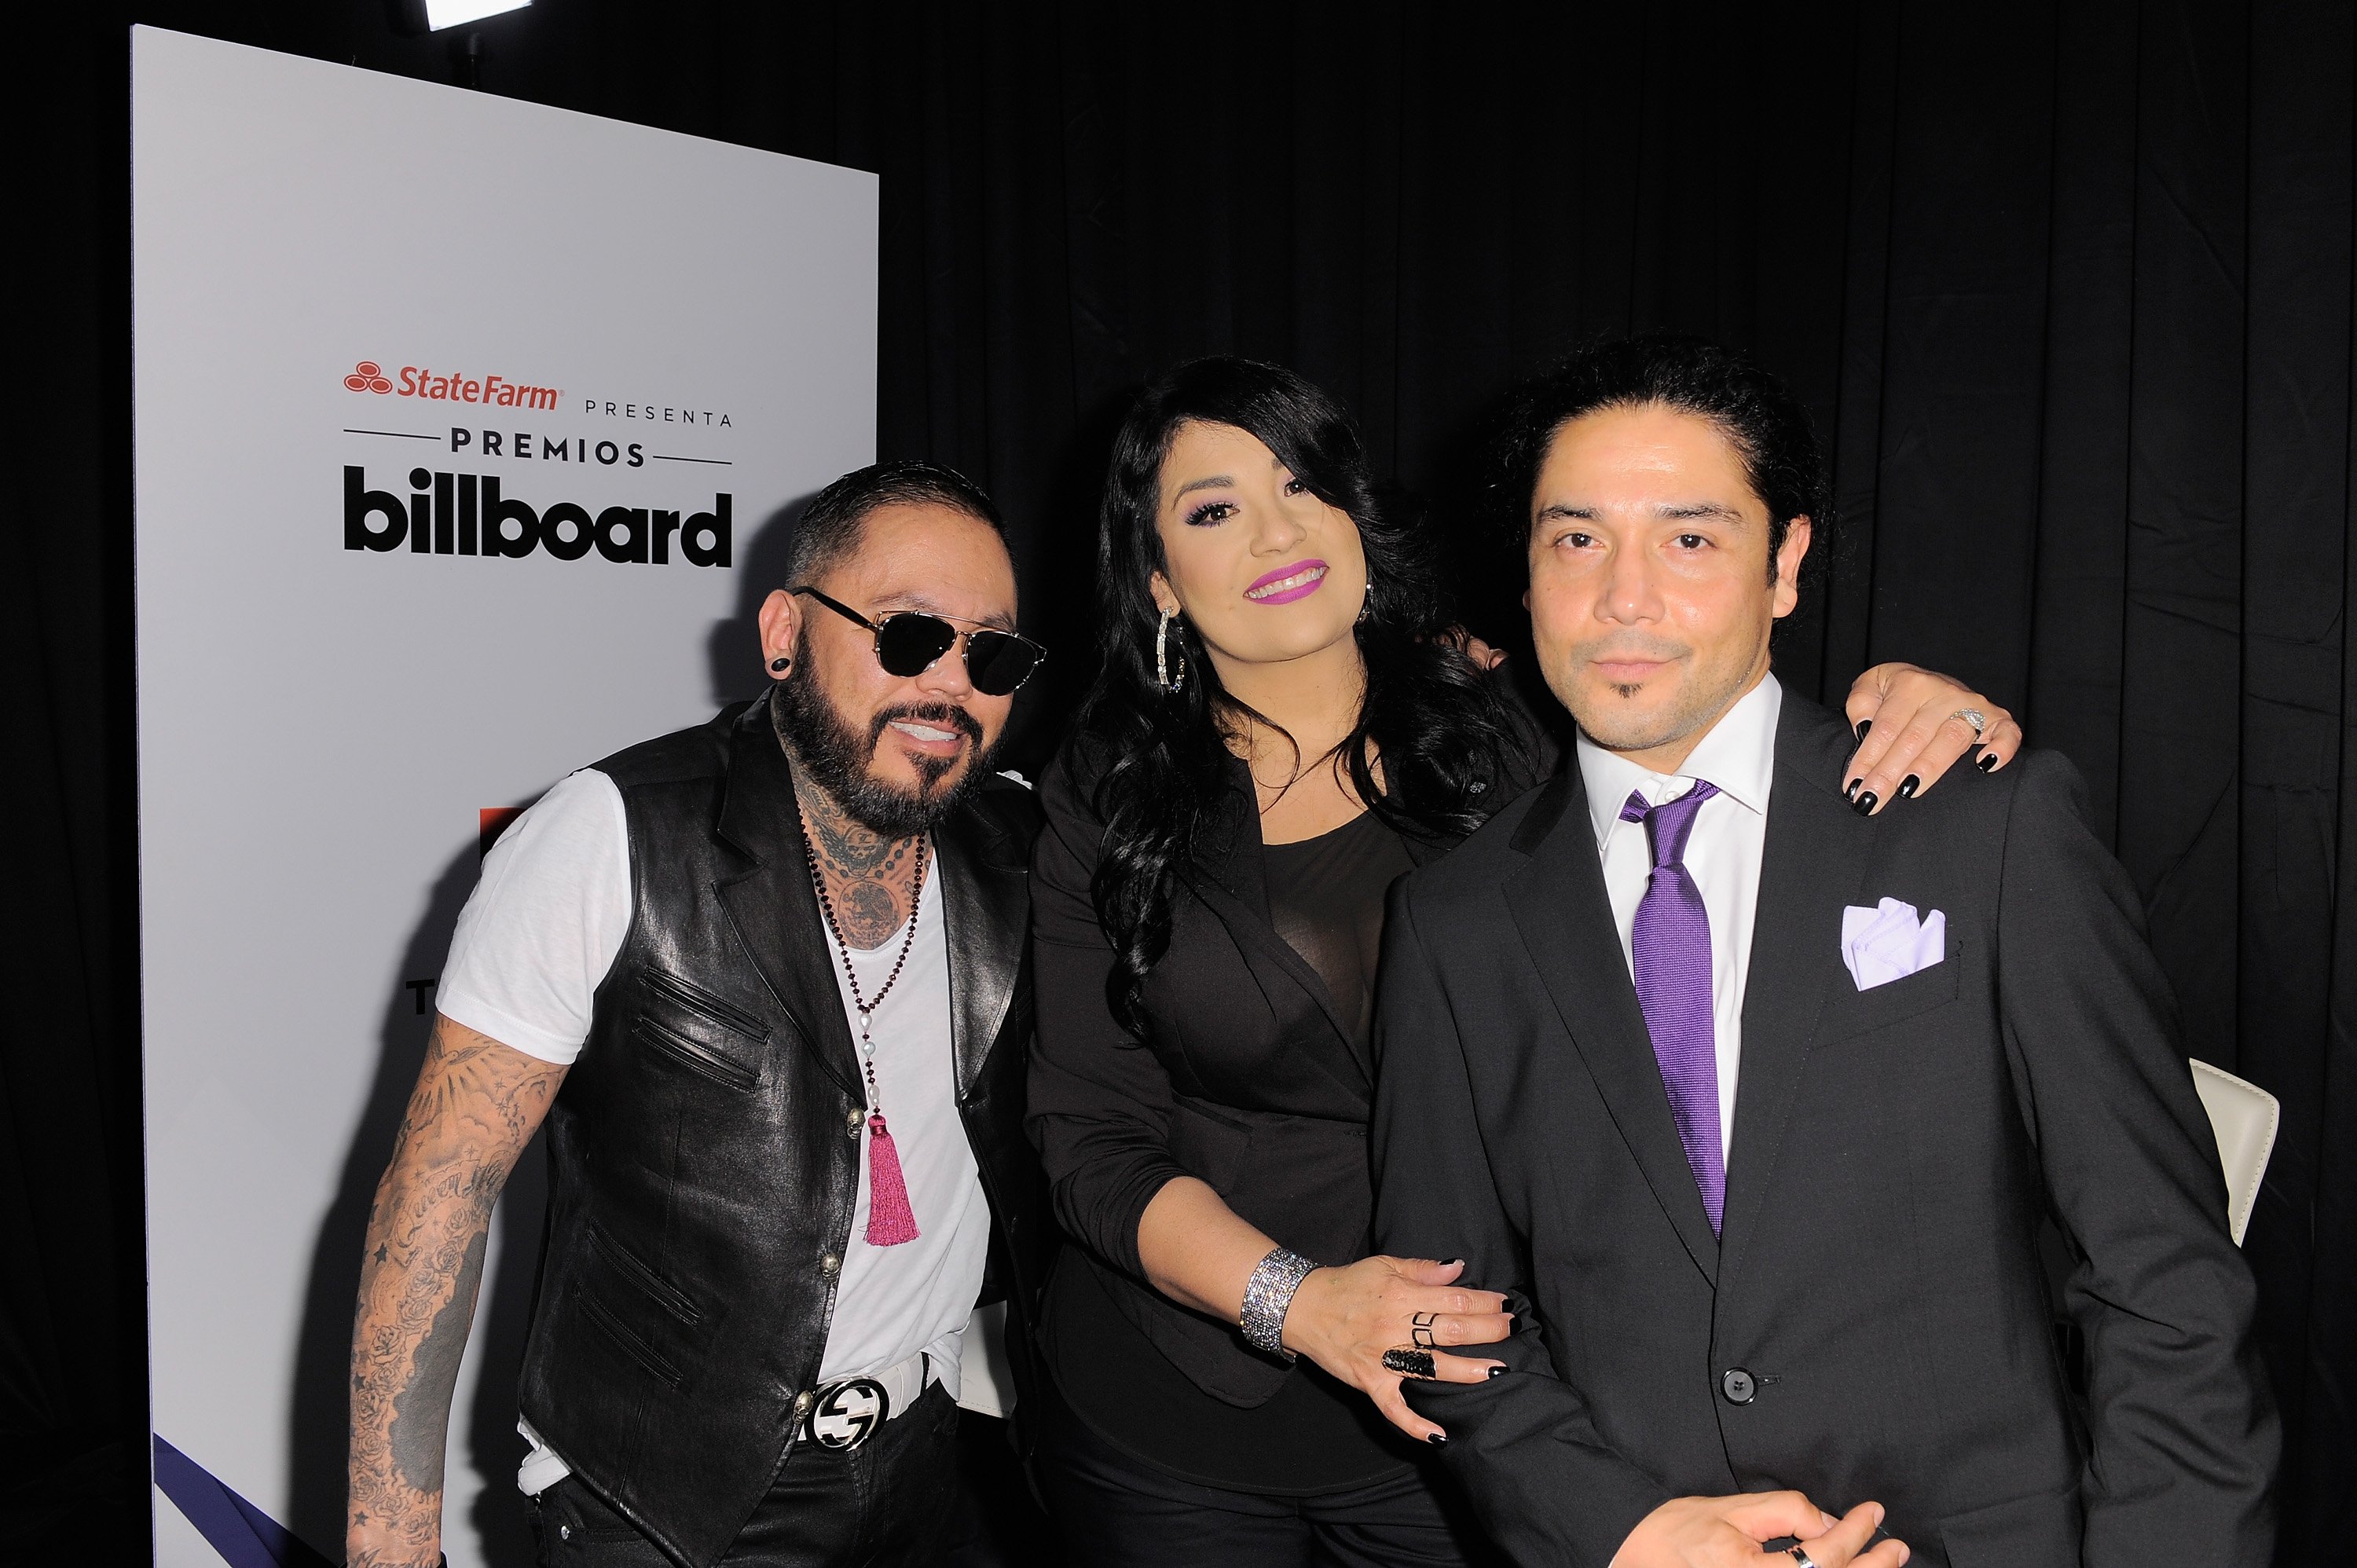 Abraham Quintanilla, Suzette Quintanilla and Chris Pérez of Los Dinos attend the 2015 Billboard Latin Music Awards "Premios Billboard" at BankUnited Center on April 30, 2015 in Miami, Florida. | Photo: Getty Images